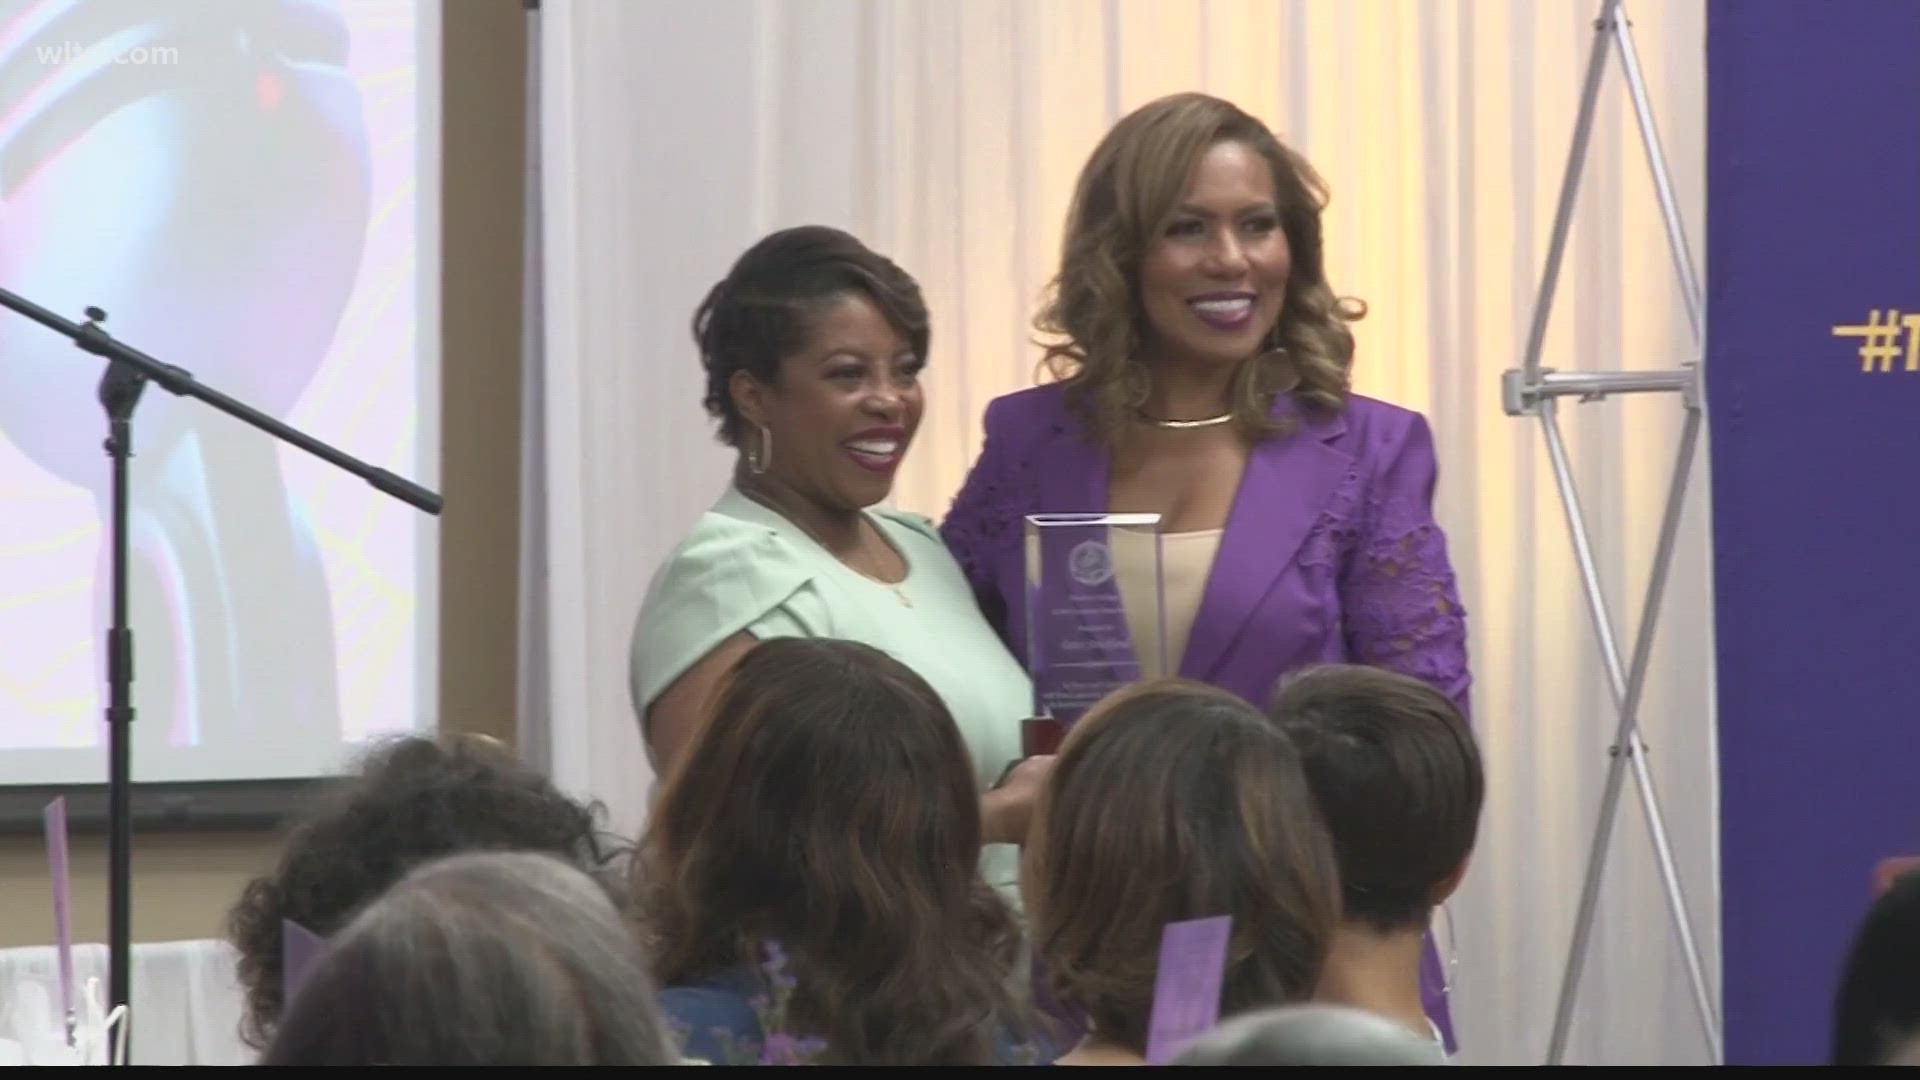 Benedict College held it's fourth annual "In Her Footsteps' luncheon.